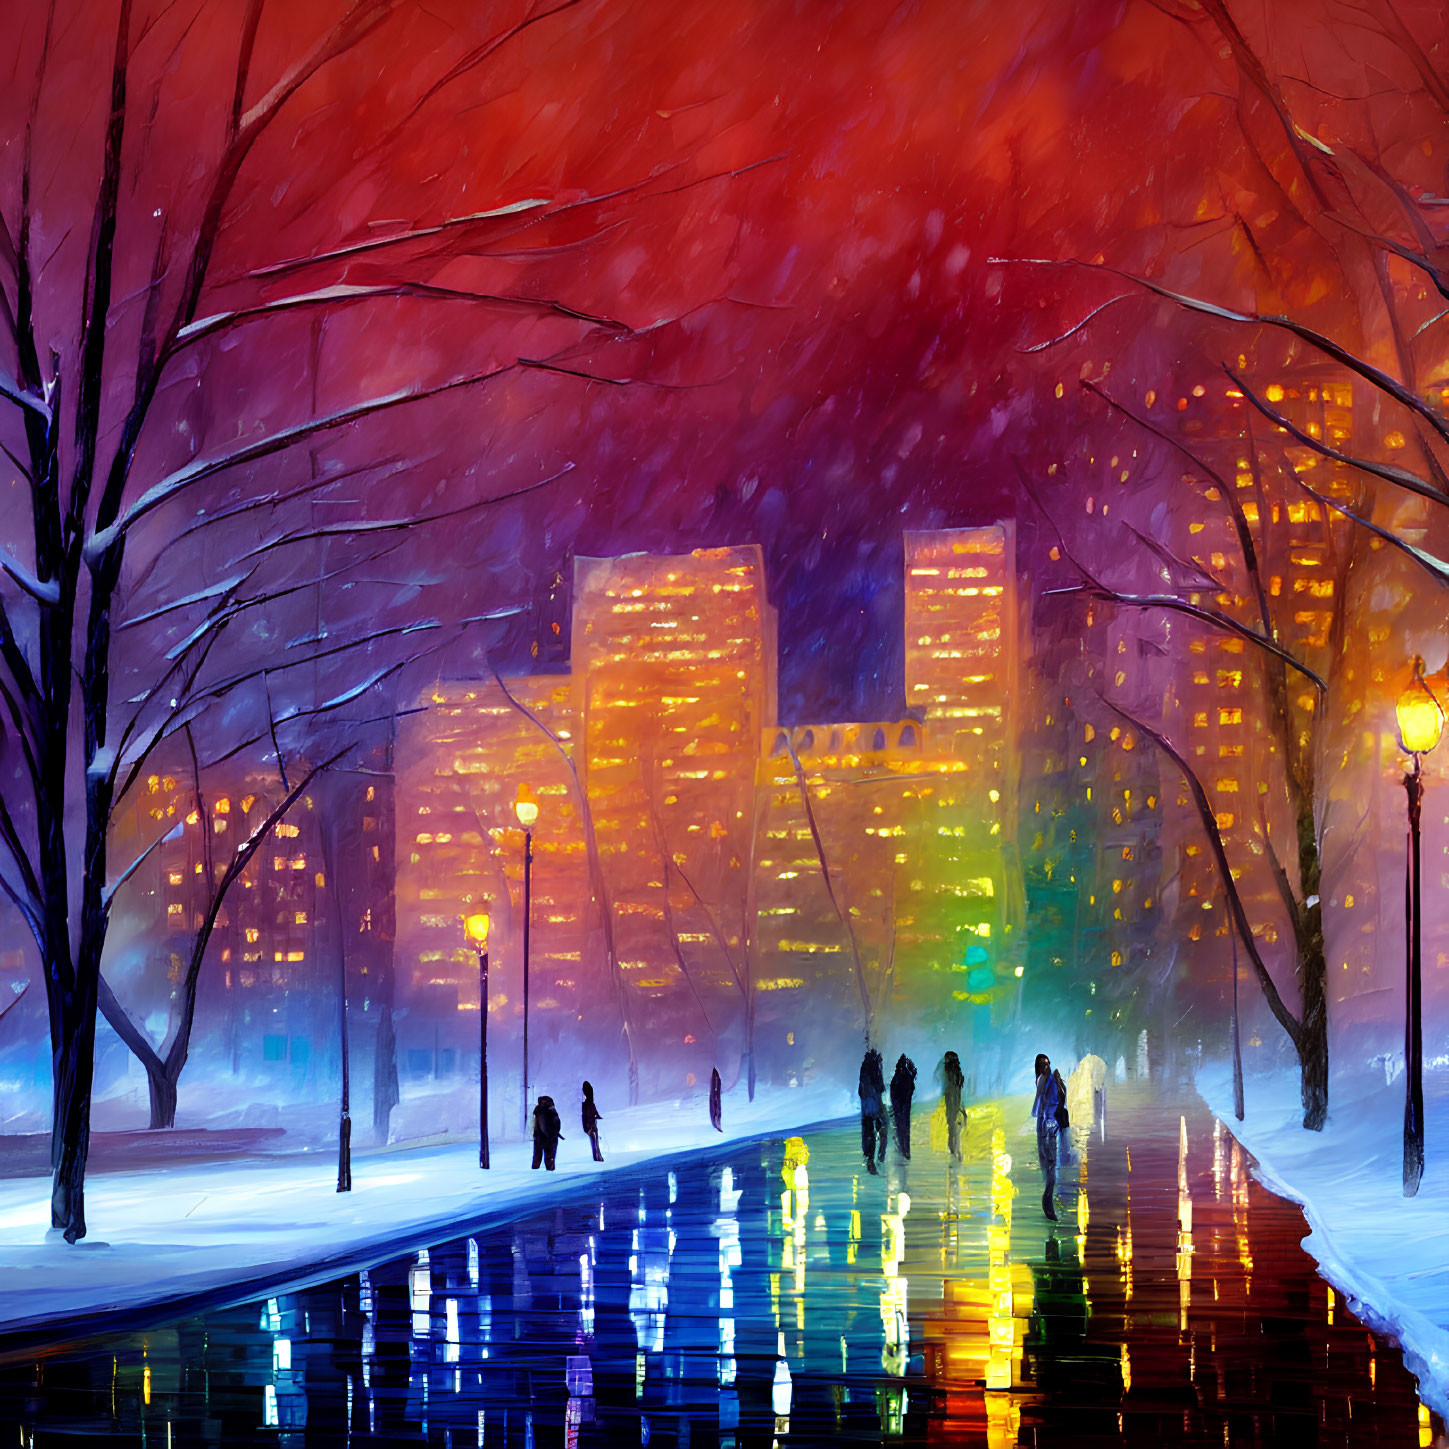 Snowy City Park Night Scene with Colorful Buildings & Silhouettes